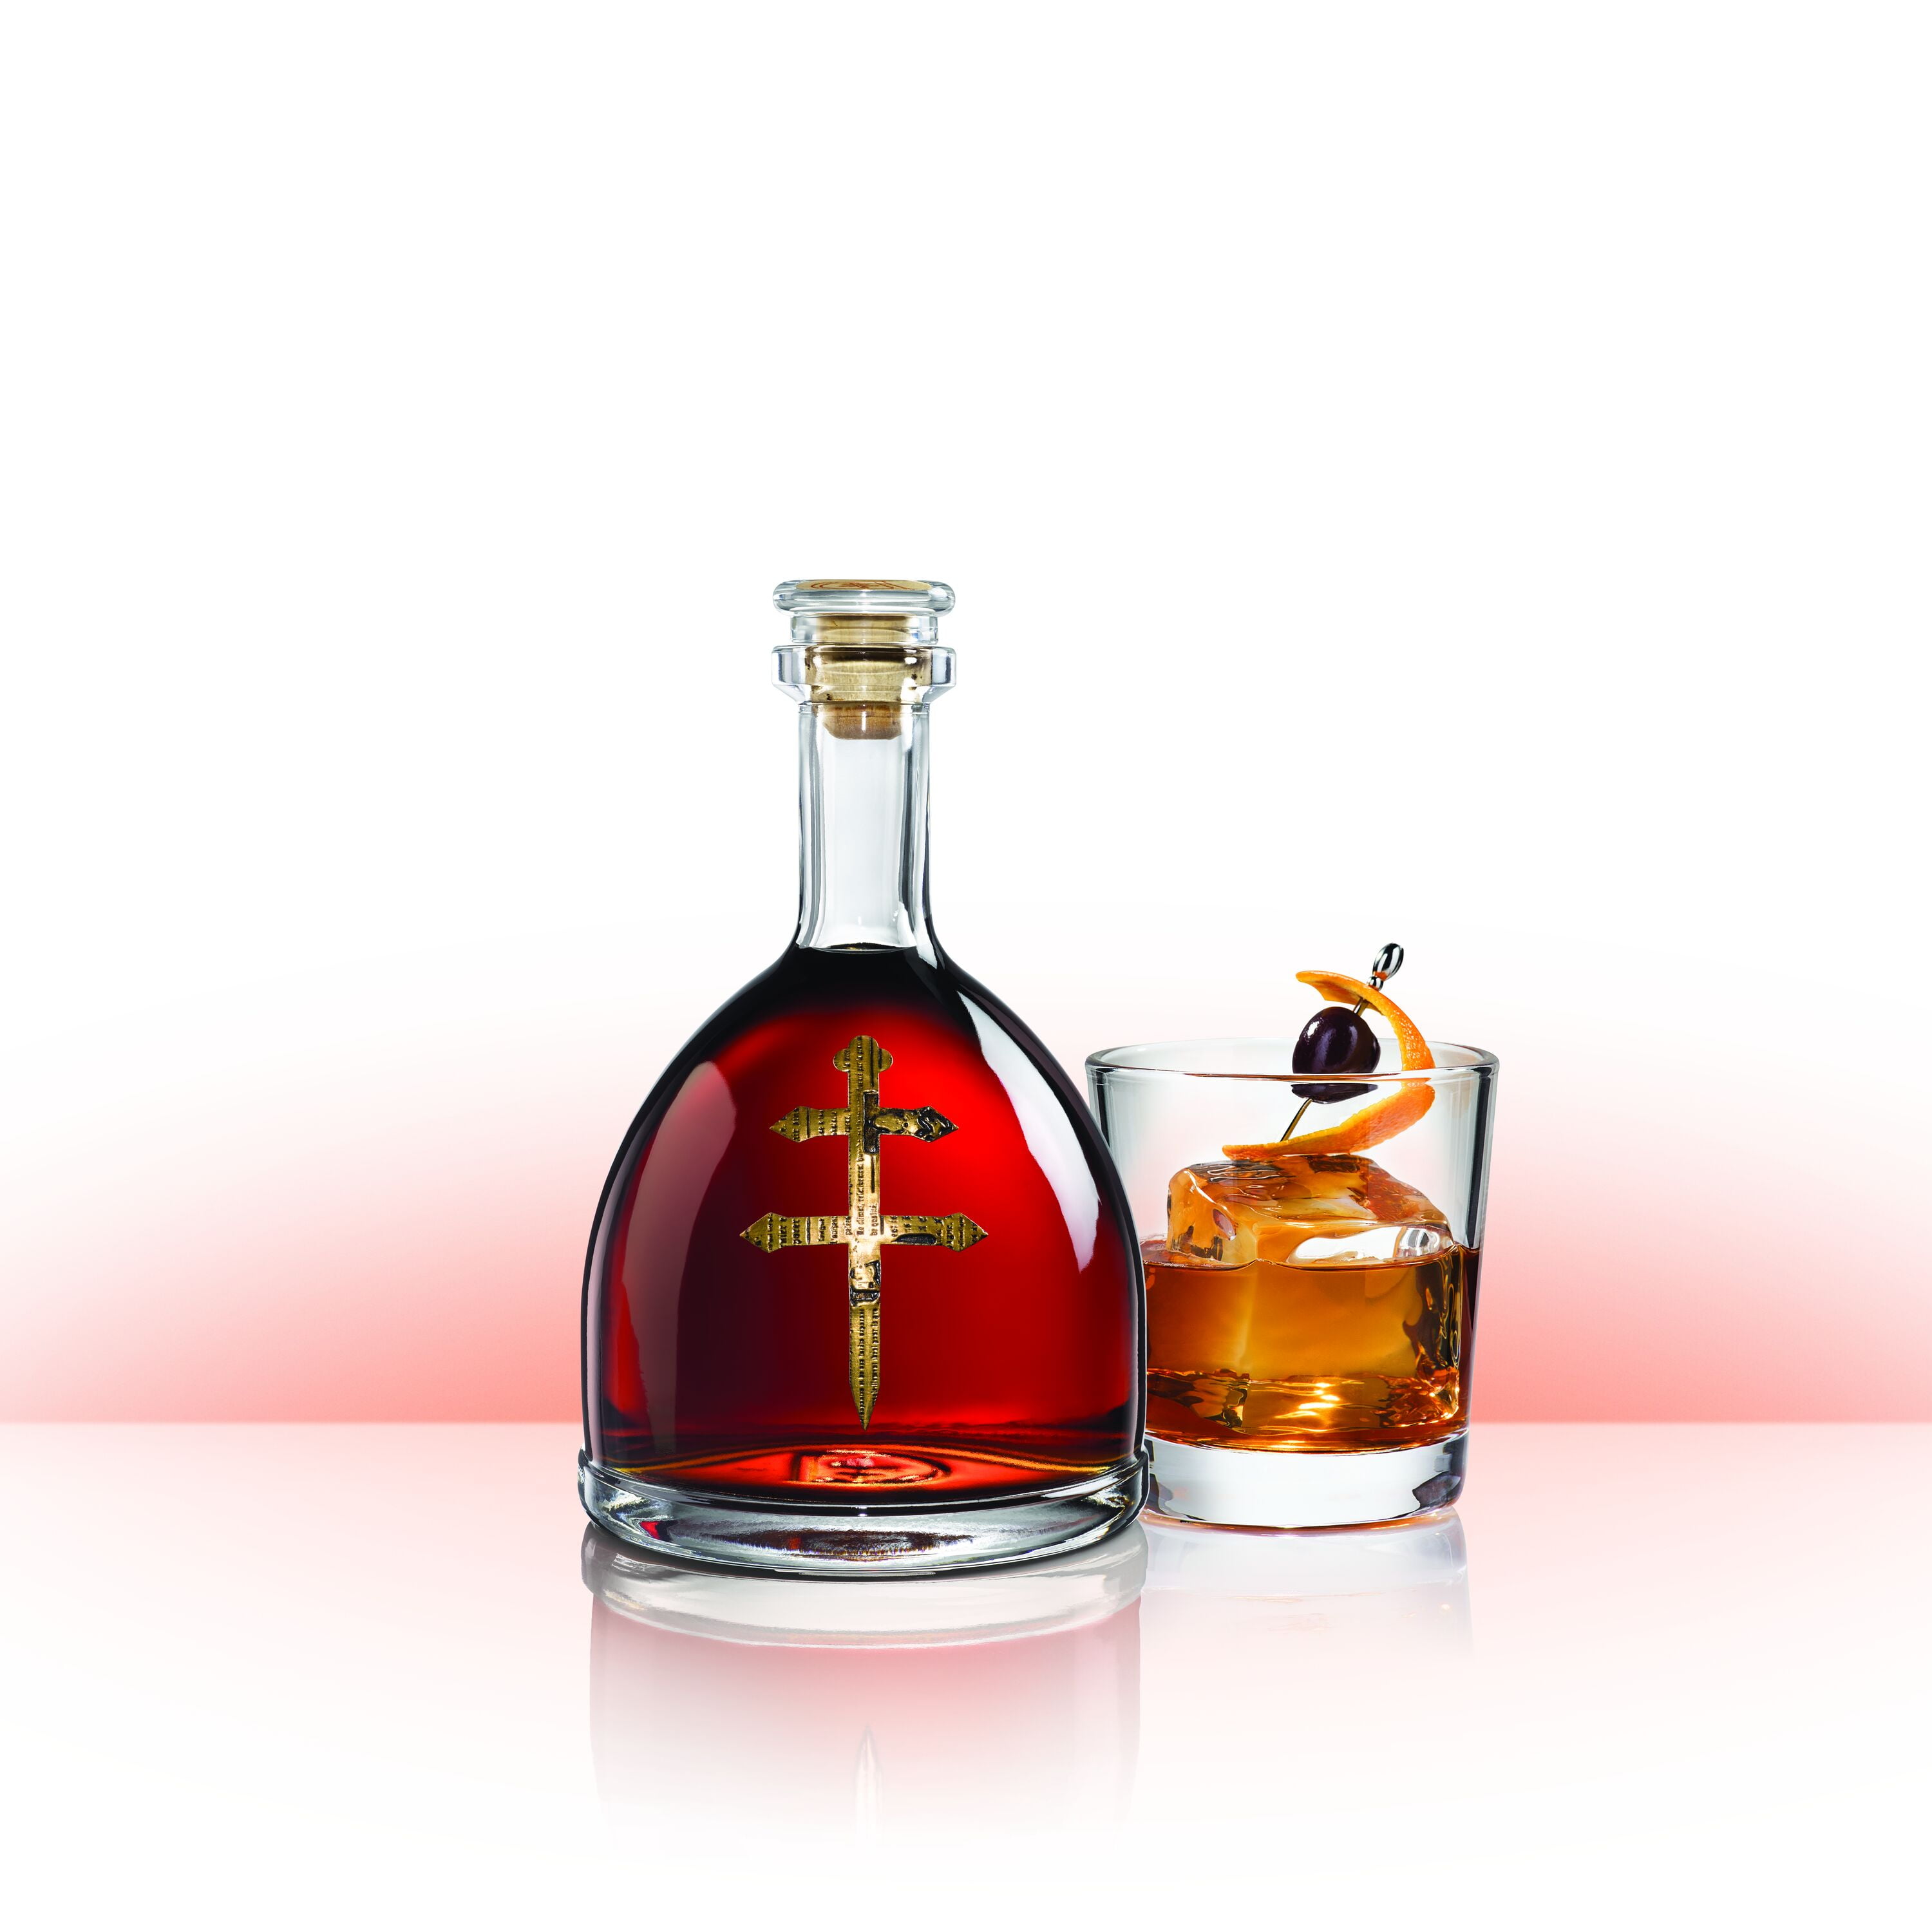 List 90+ Images what does the symbol on the dusse bottle mean Sharp